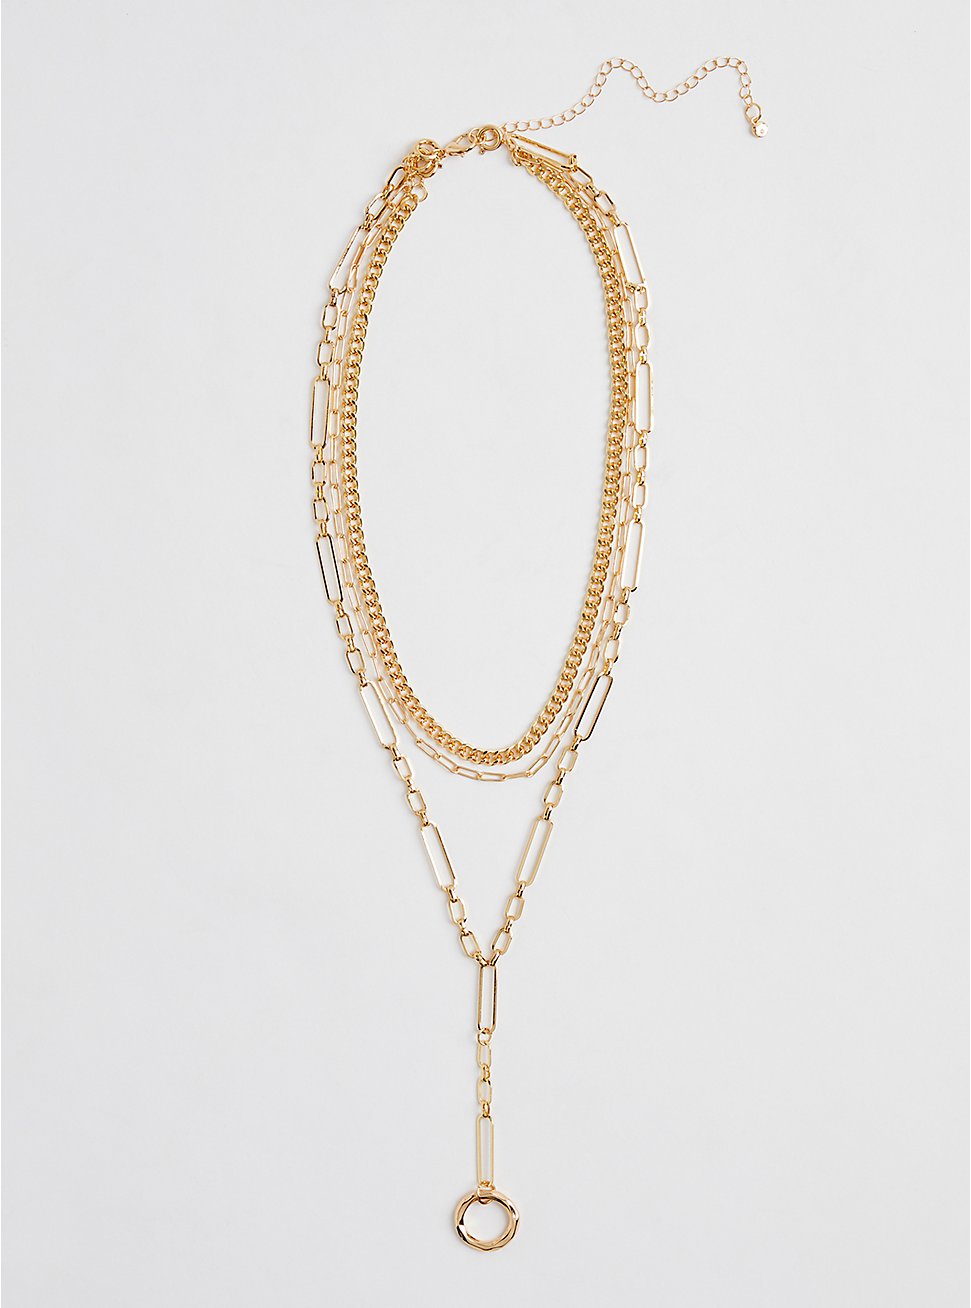 Link & Layered Y Necklace - Gold Tone, , hi-res